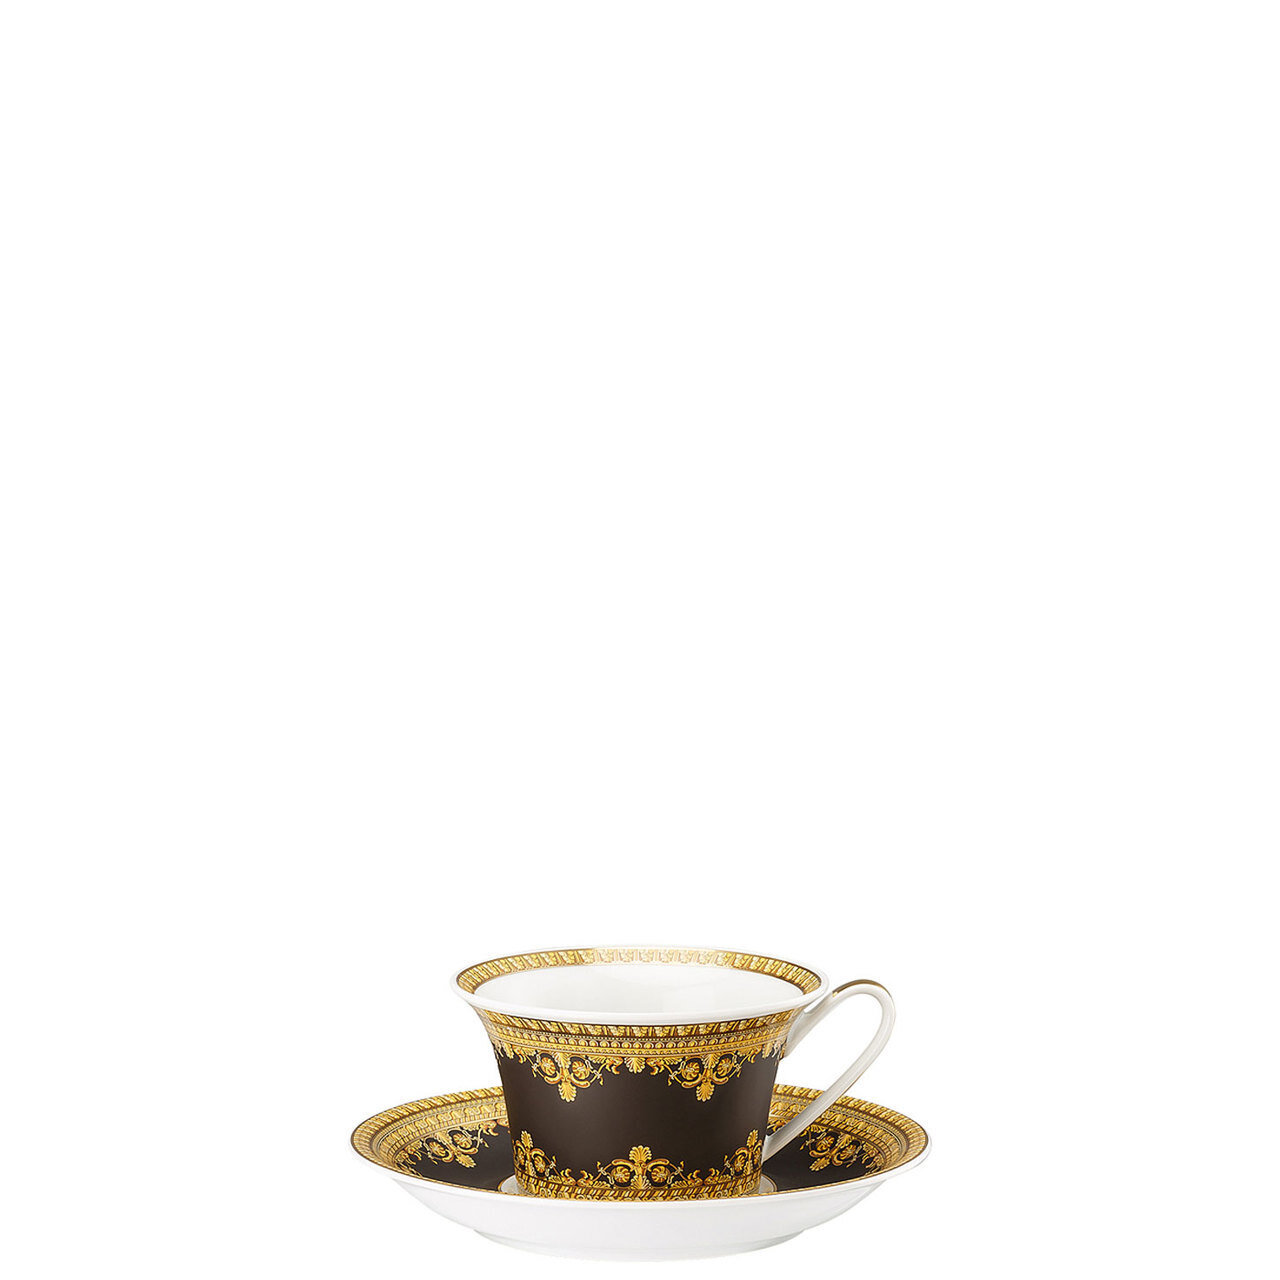 Versace I Love Baroque Nero Tea Cup and Saucer 6 1/4 Inch